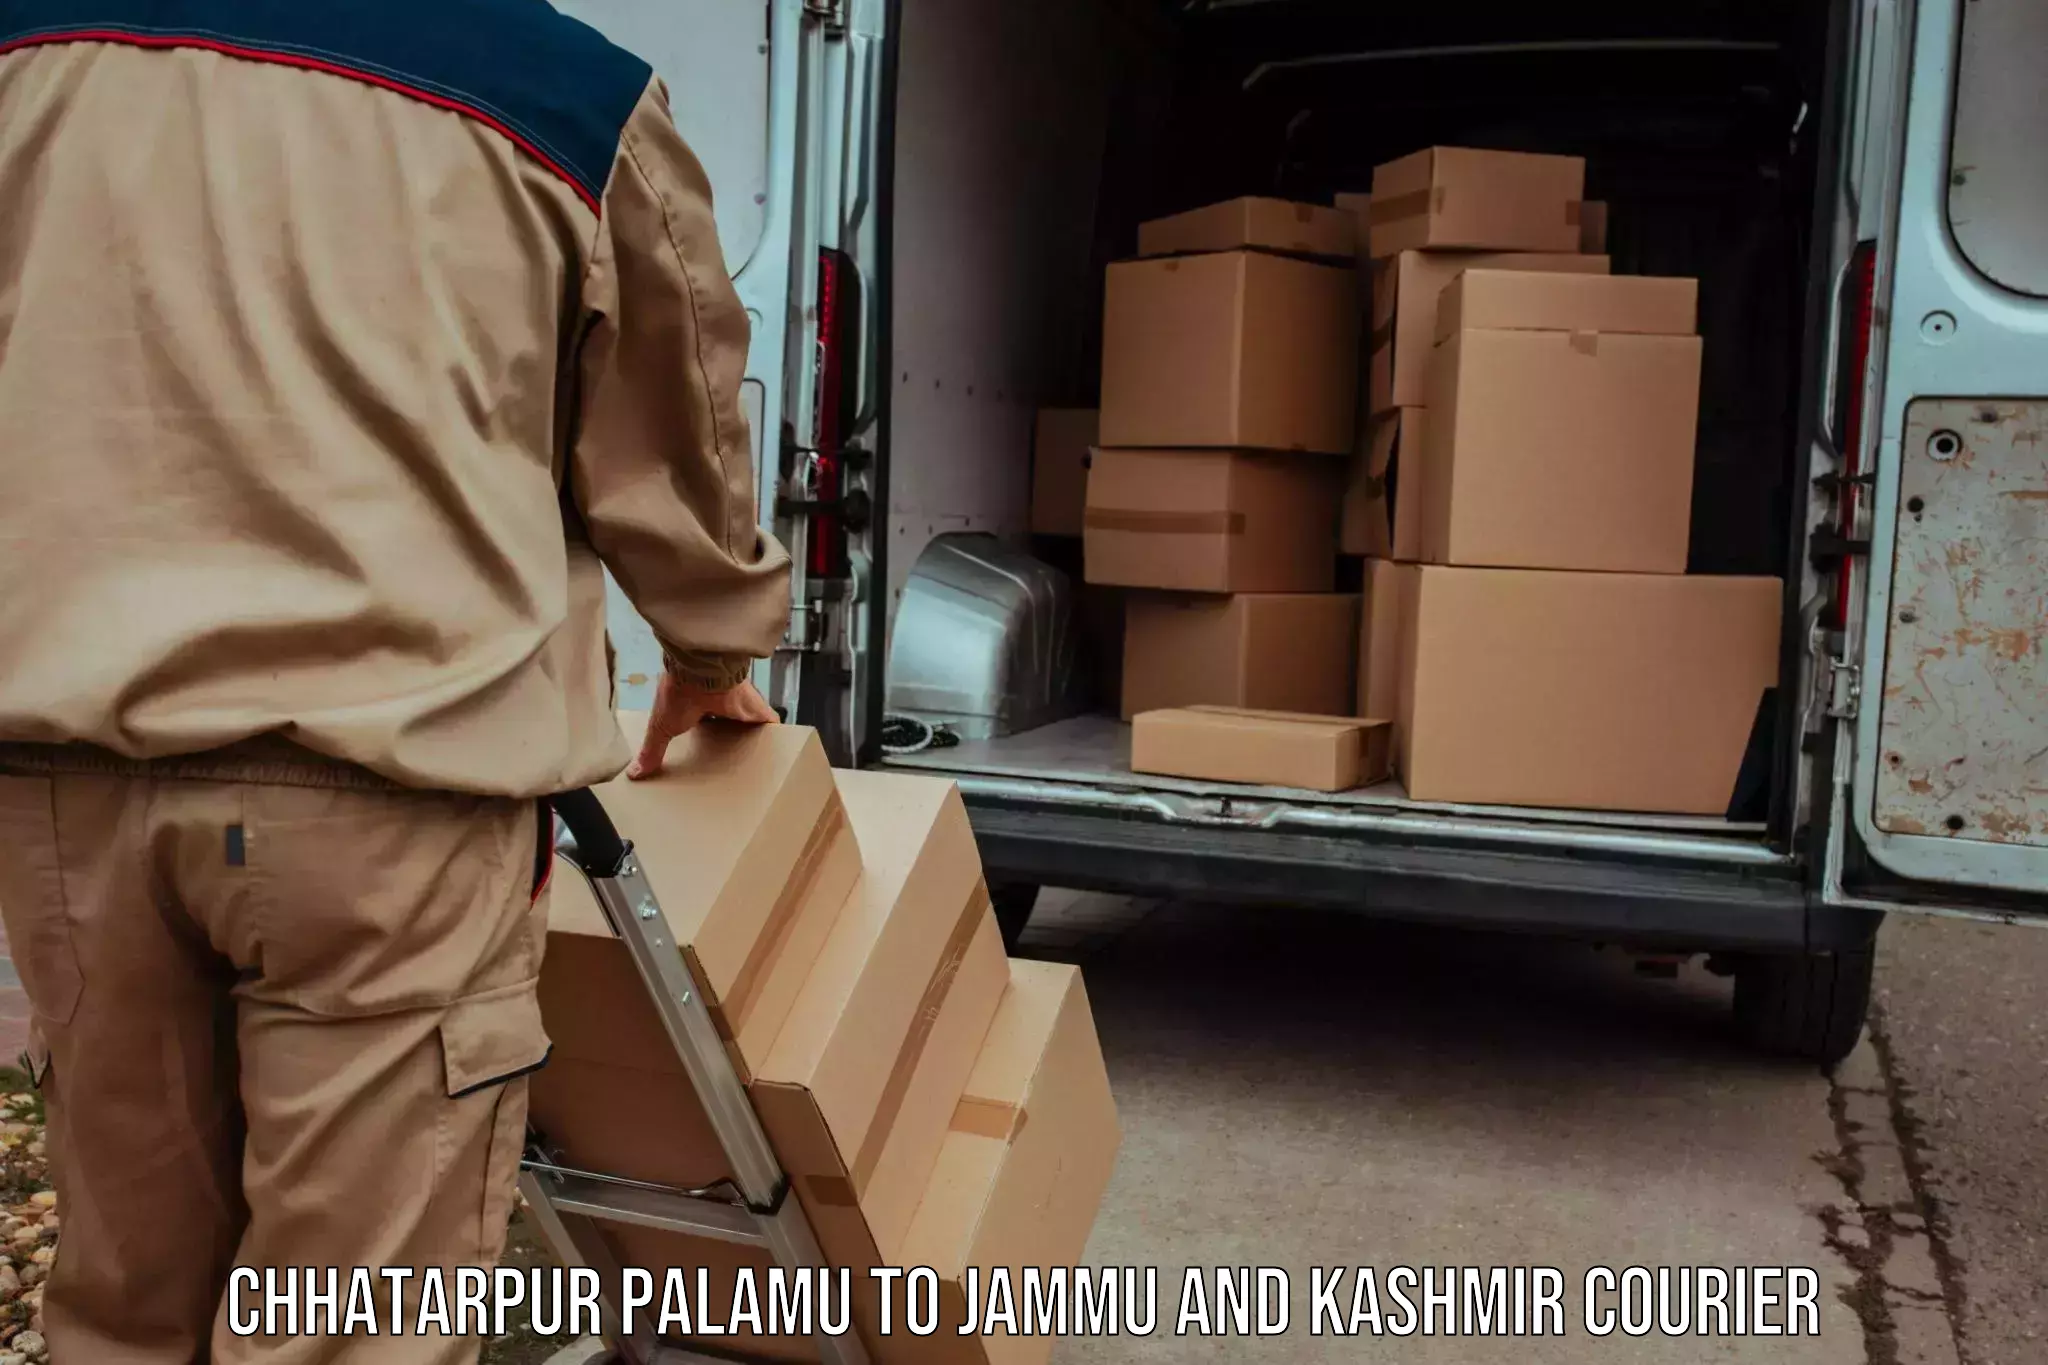 Automated parcel services Chhatarpur Palamu to Poonch